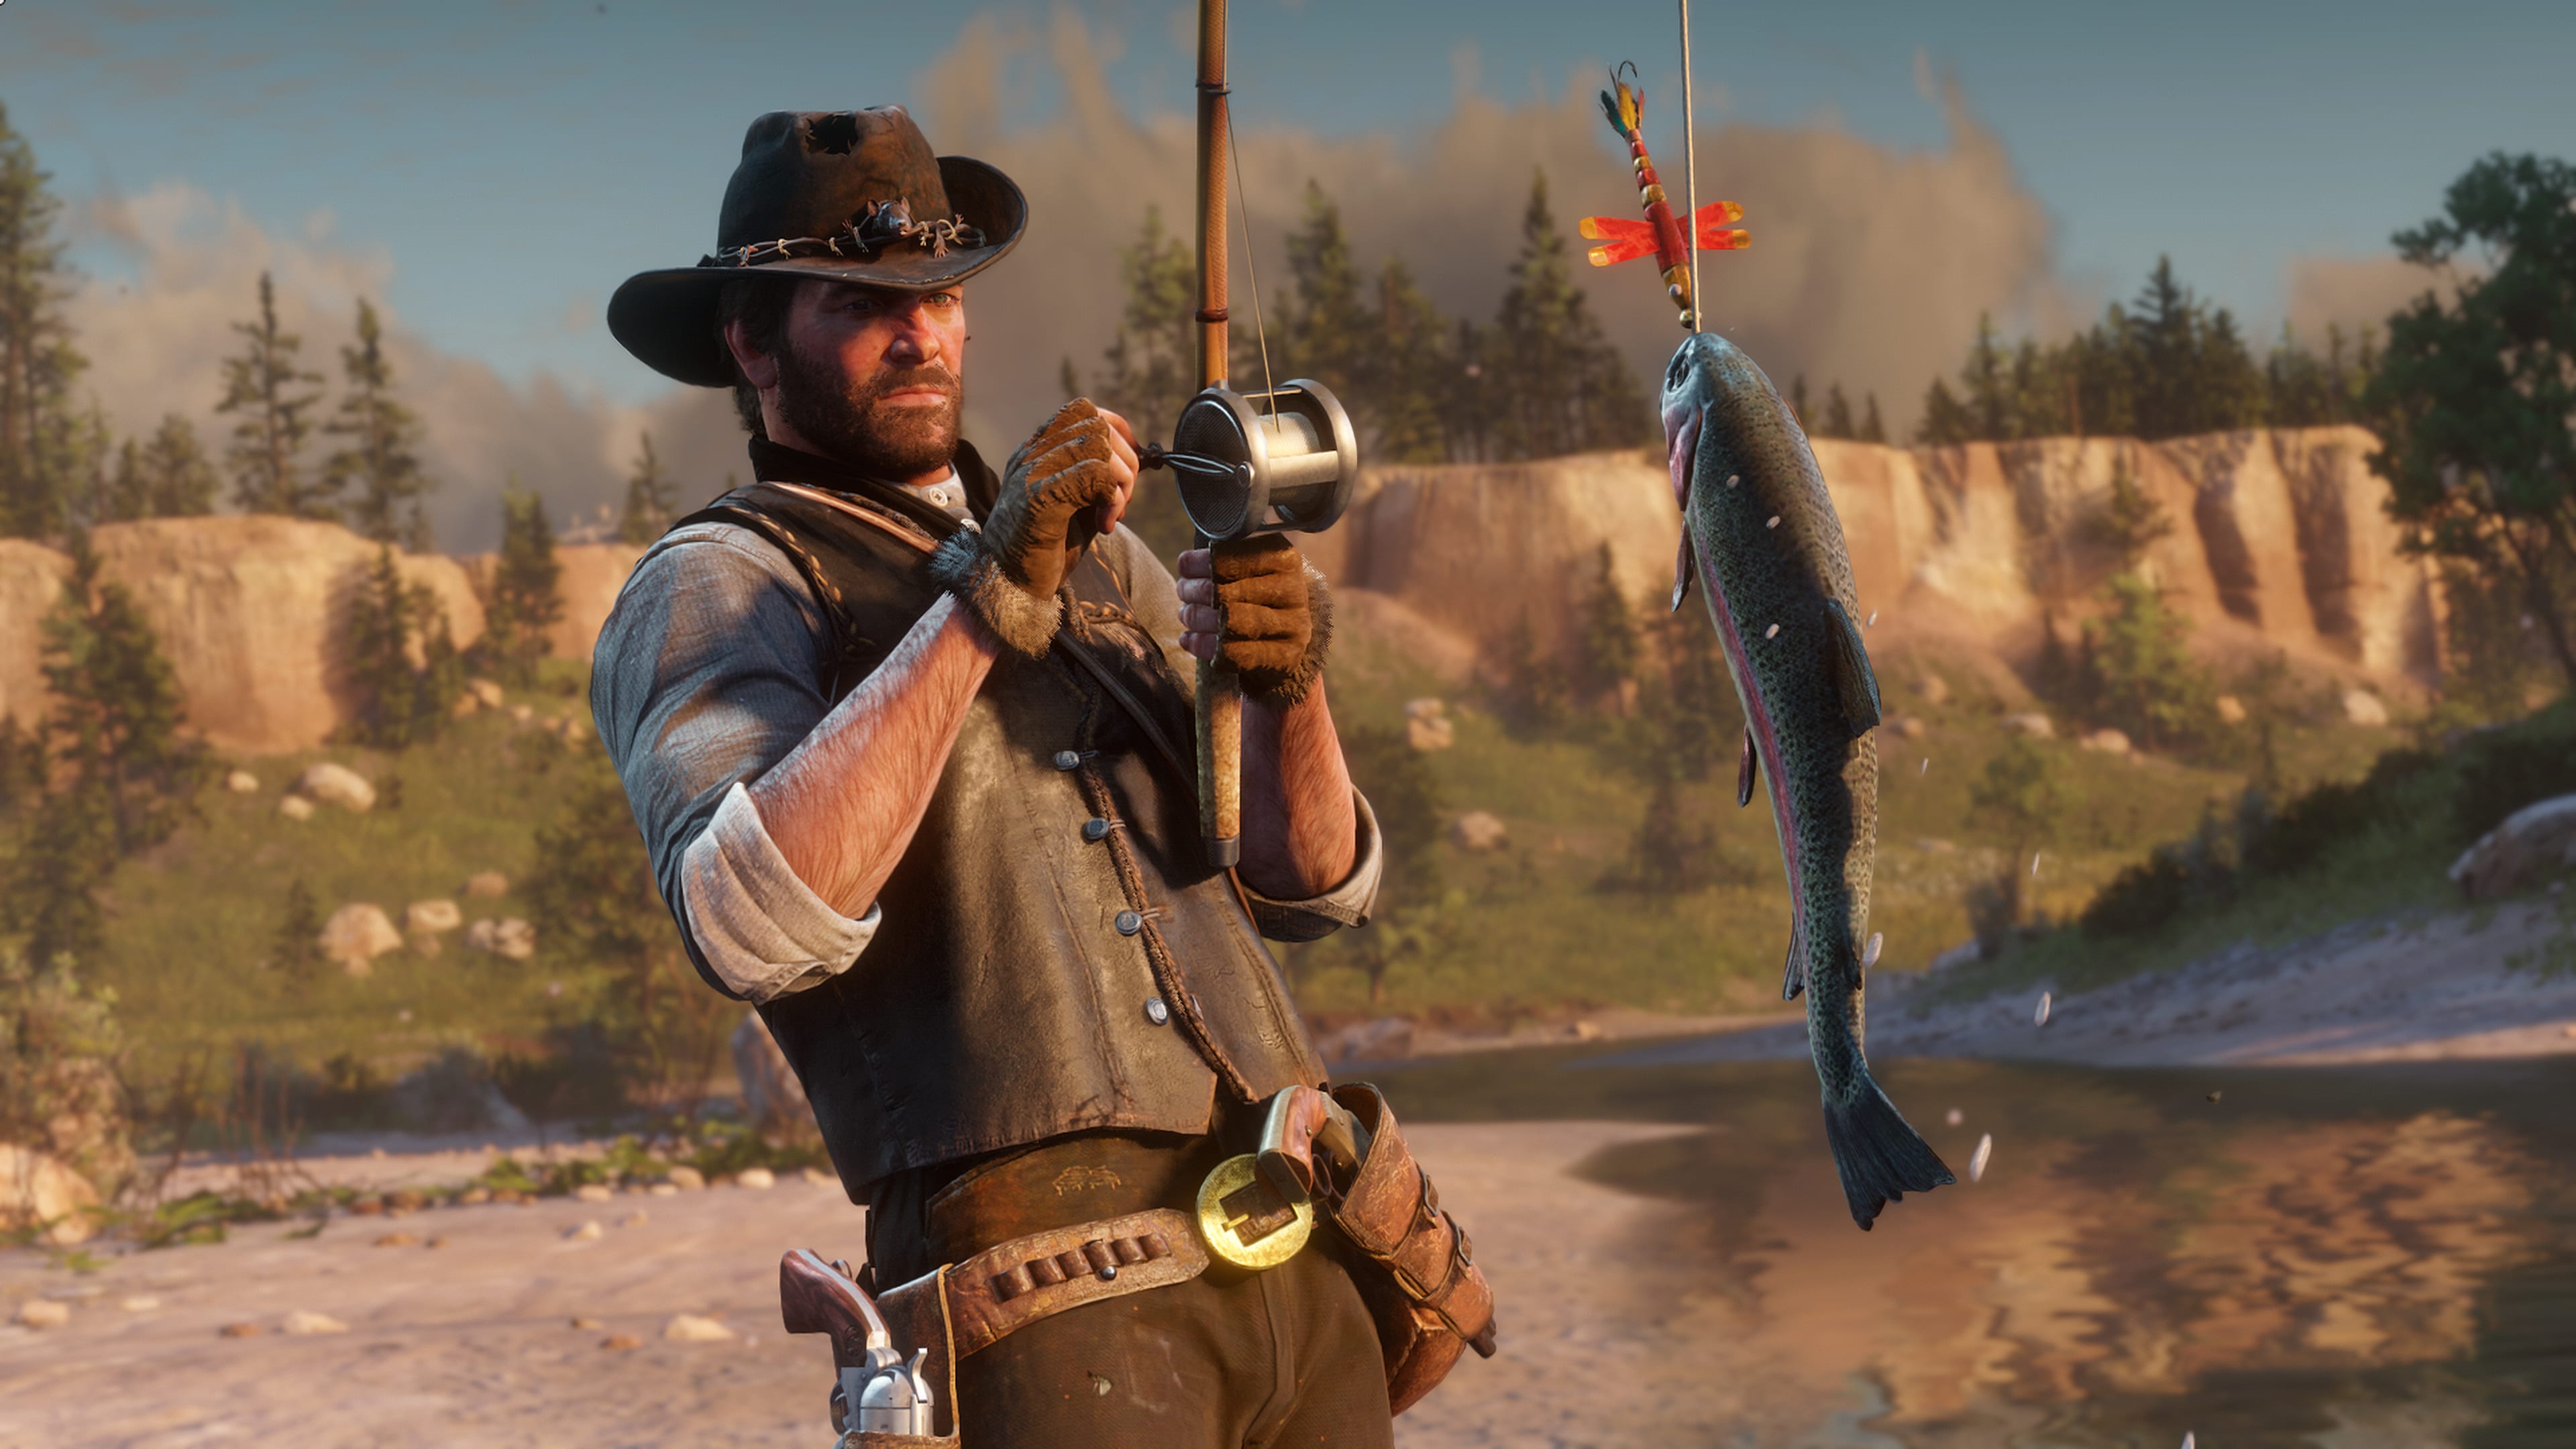 Red Dead Redemption 2 animals include 19 kinds of horses, plus a plethora of fish, birds, and other | GamesRadar+